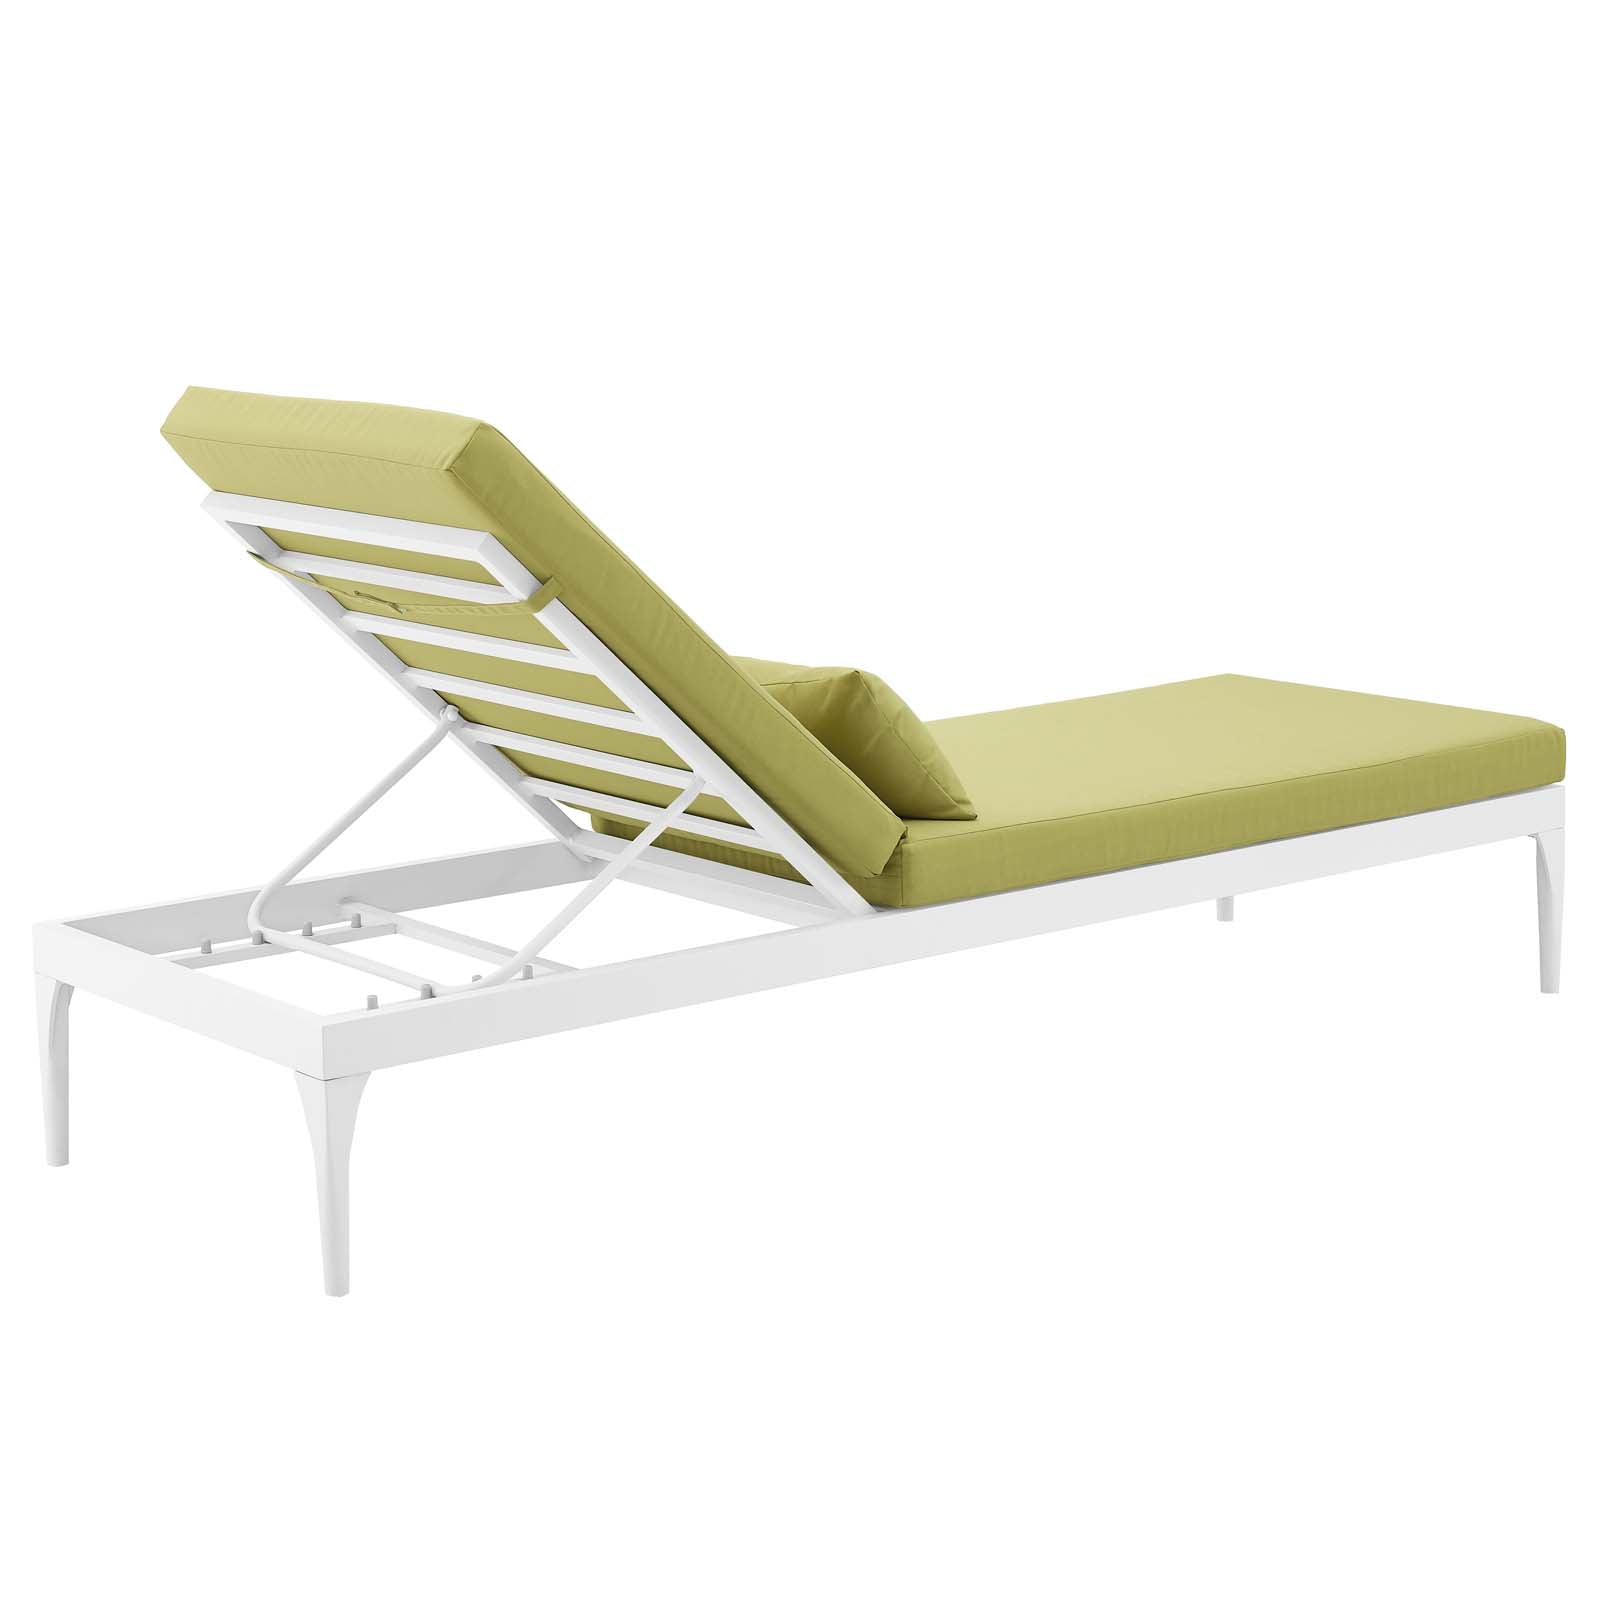 Modway Outdoor Loungers - Perspective Cushion Outdoor Patio Chaise Lounge Chair White Peridot